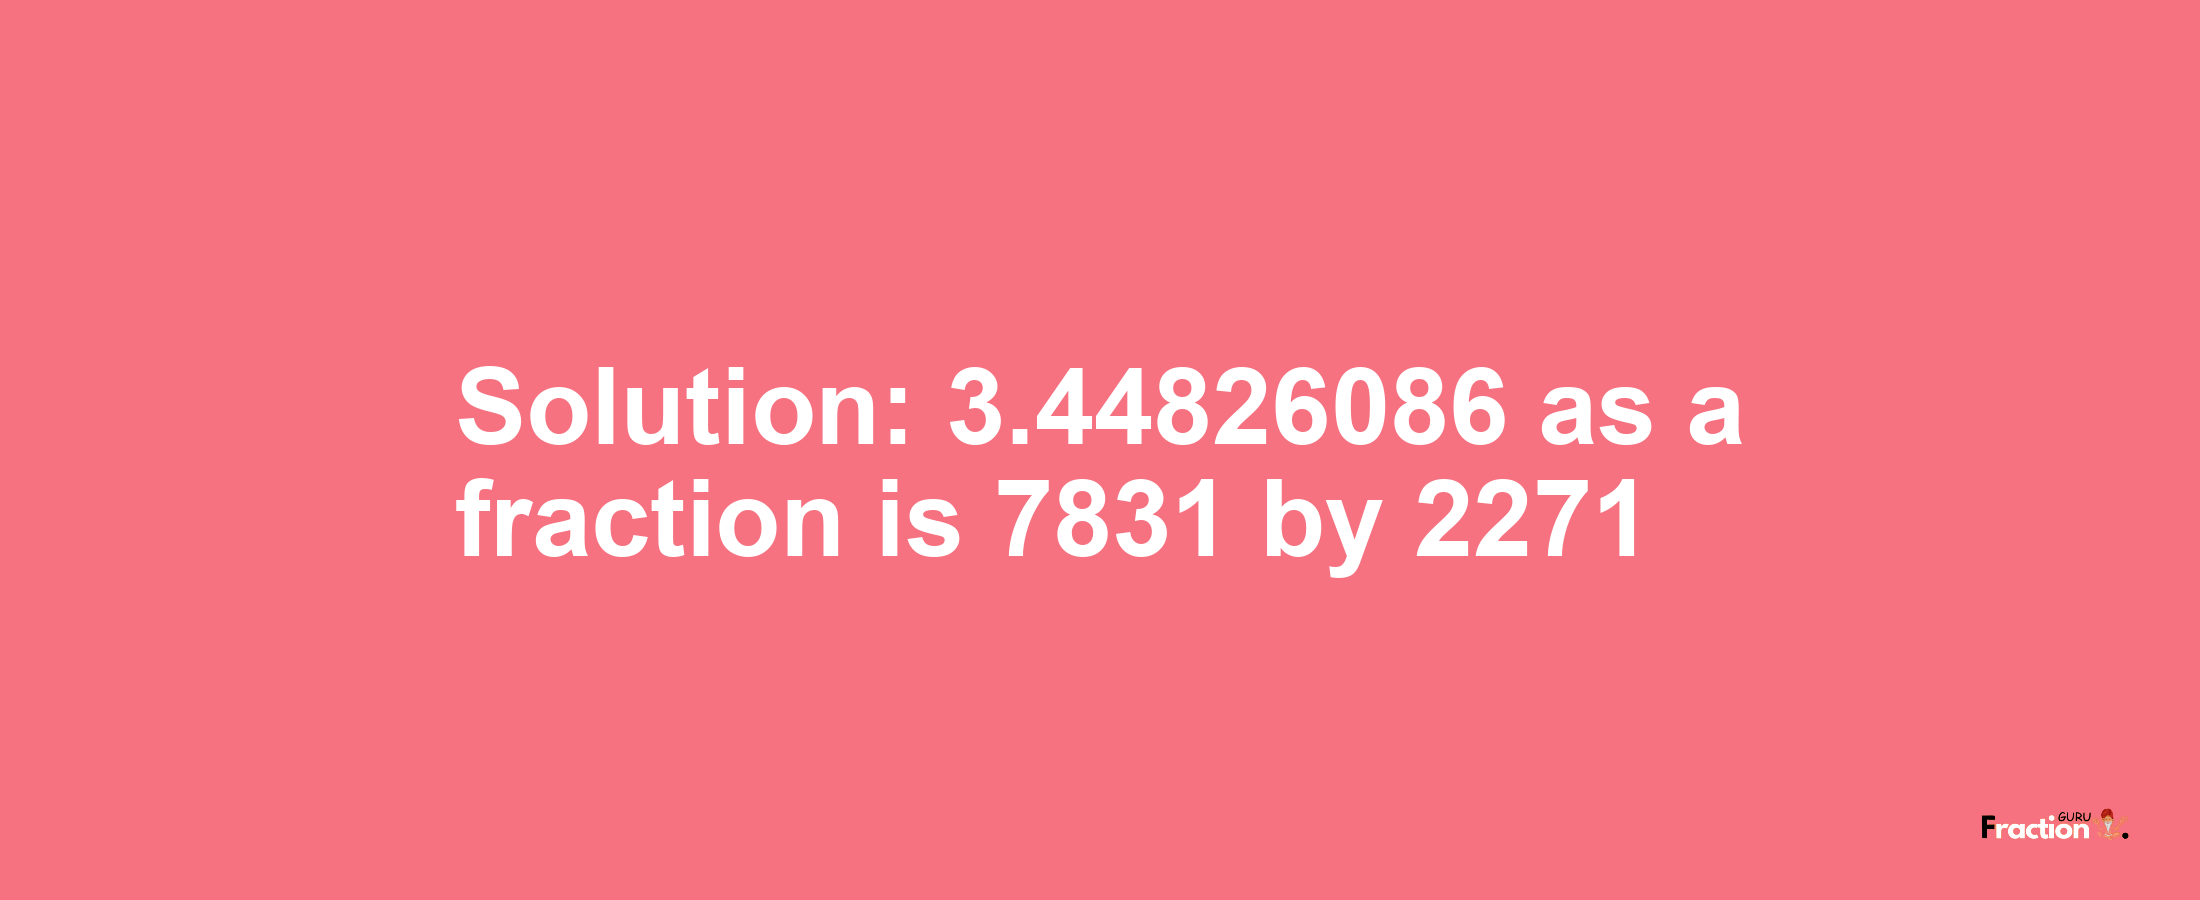 Solution:3.44826086 as a fraction is 7831/2271